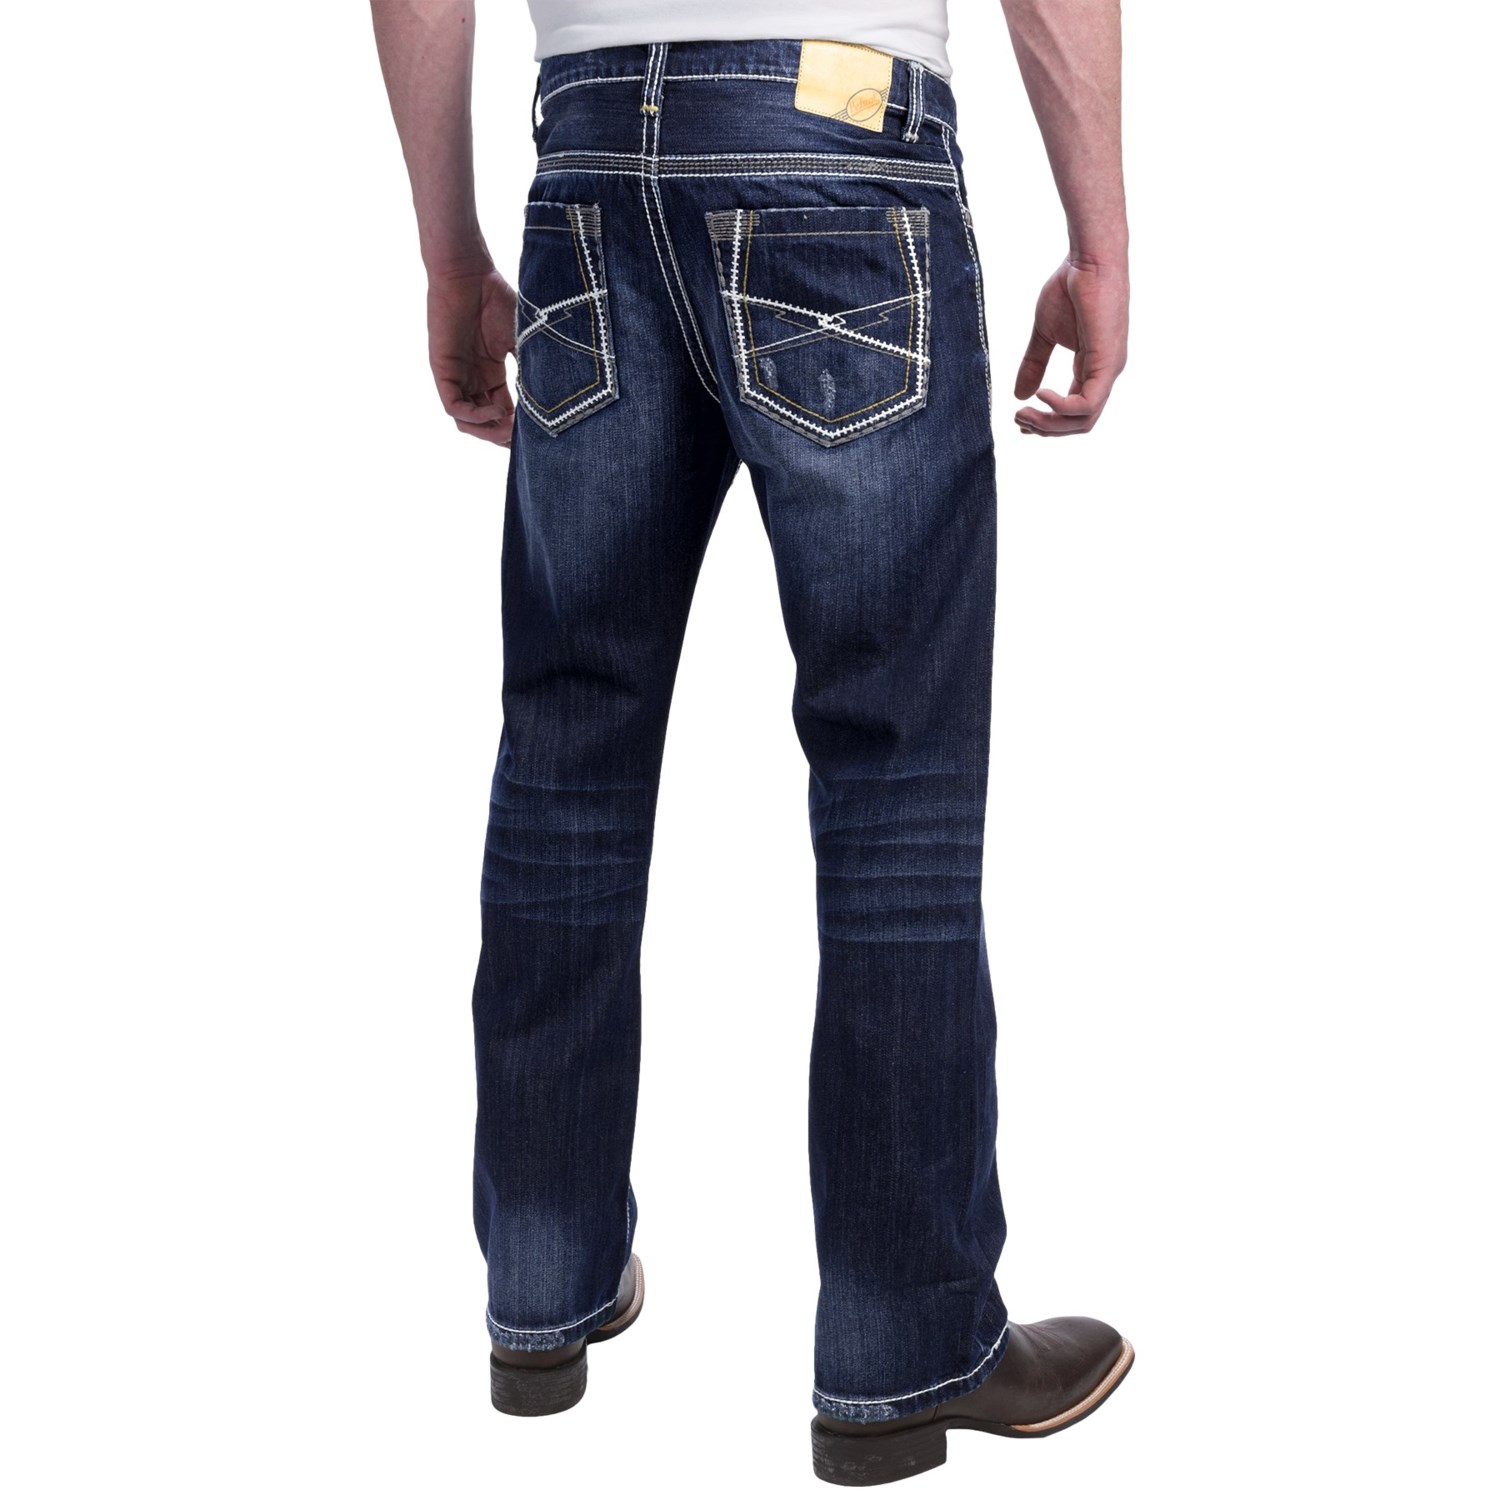 Petrol Ray Jeans (For Men) 9269K - Save 75%